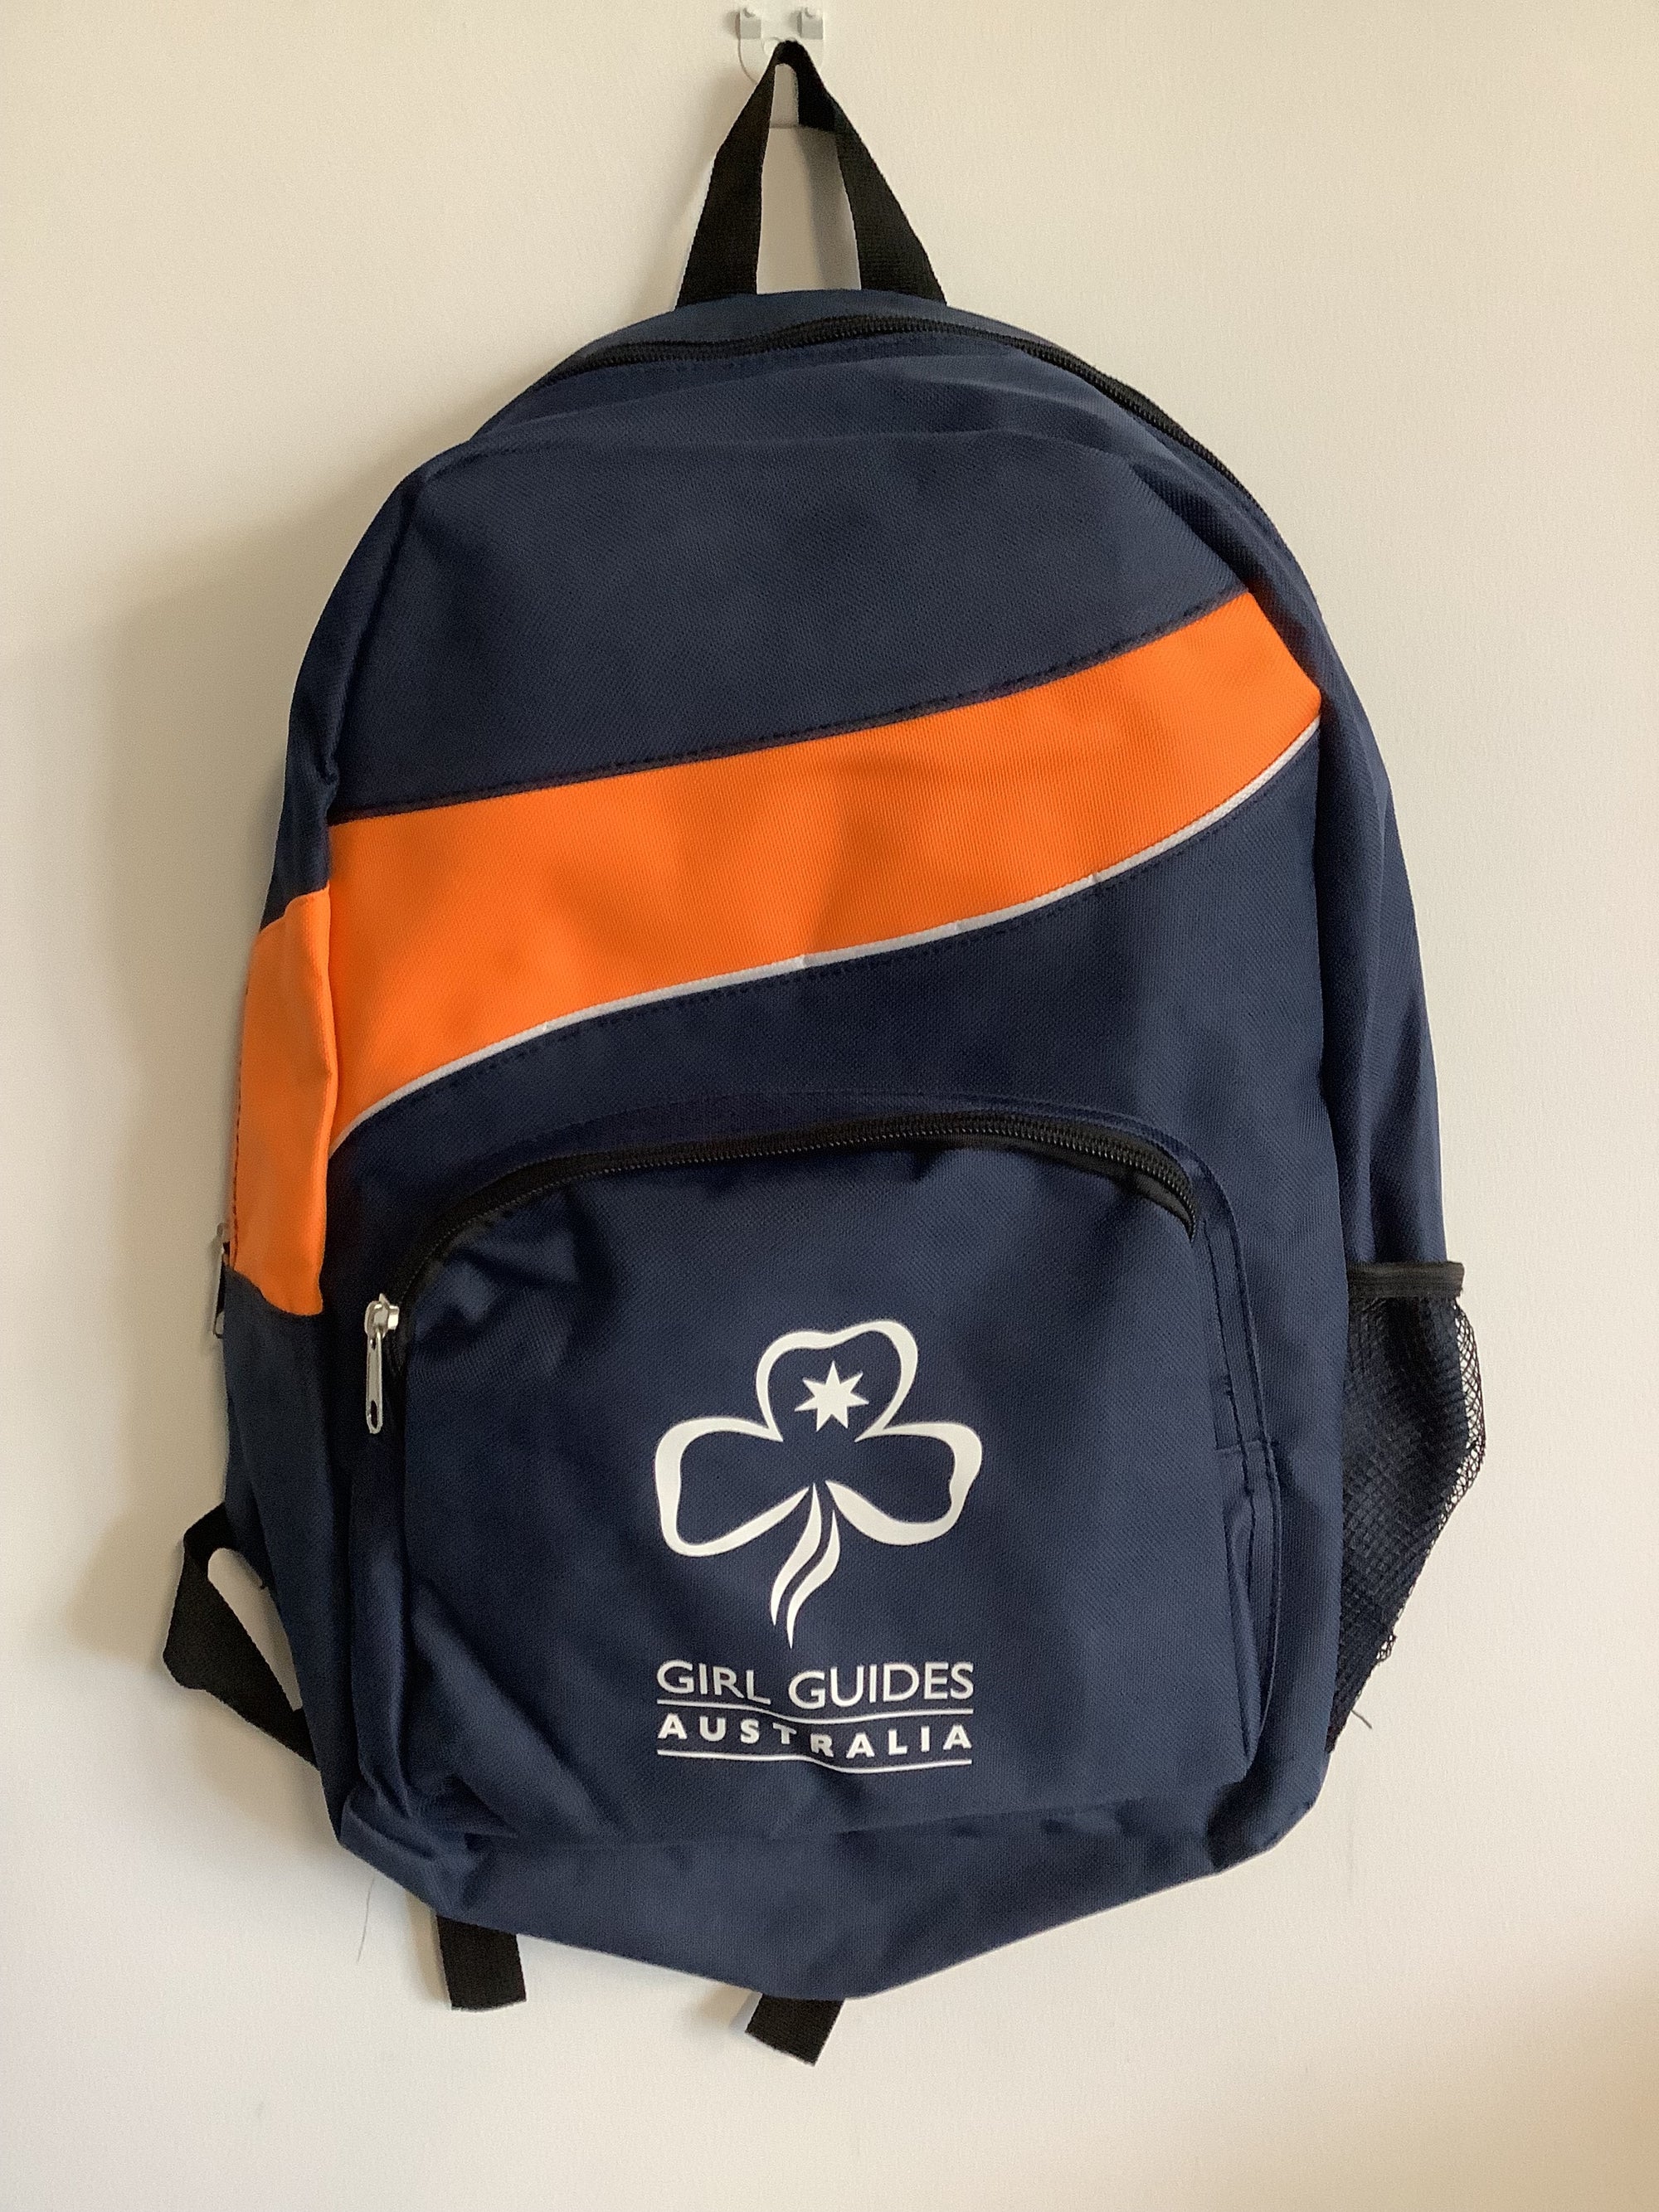 an orange and blue backpack with trefoil and girl guides Australia on the front pocket